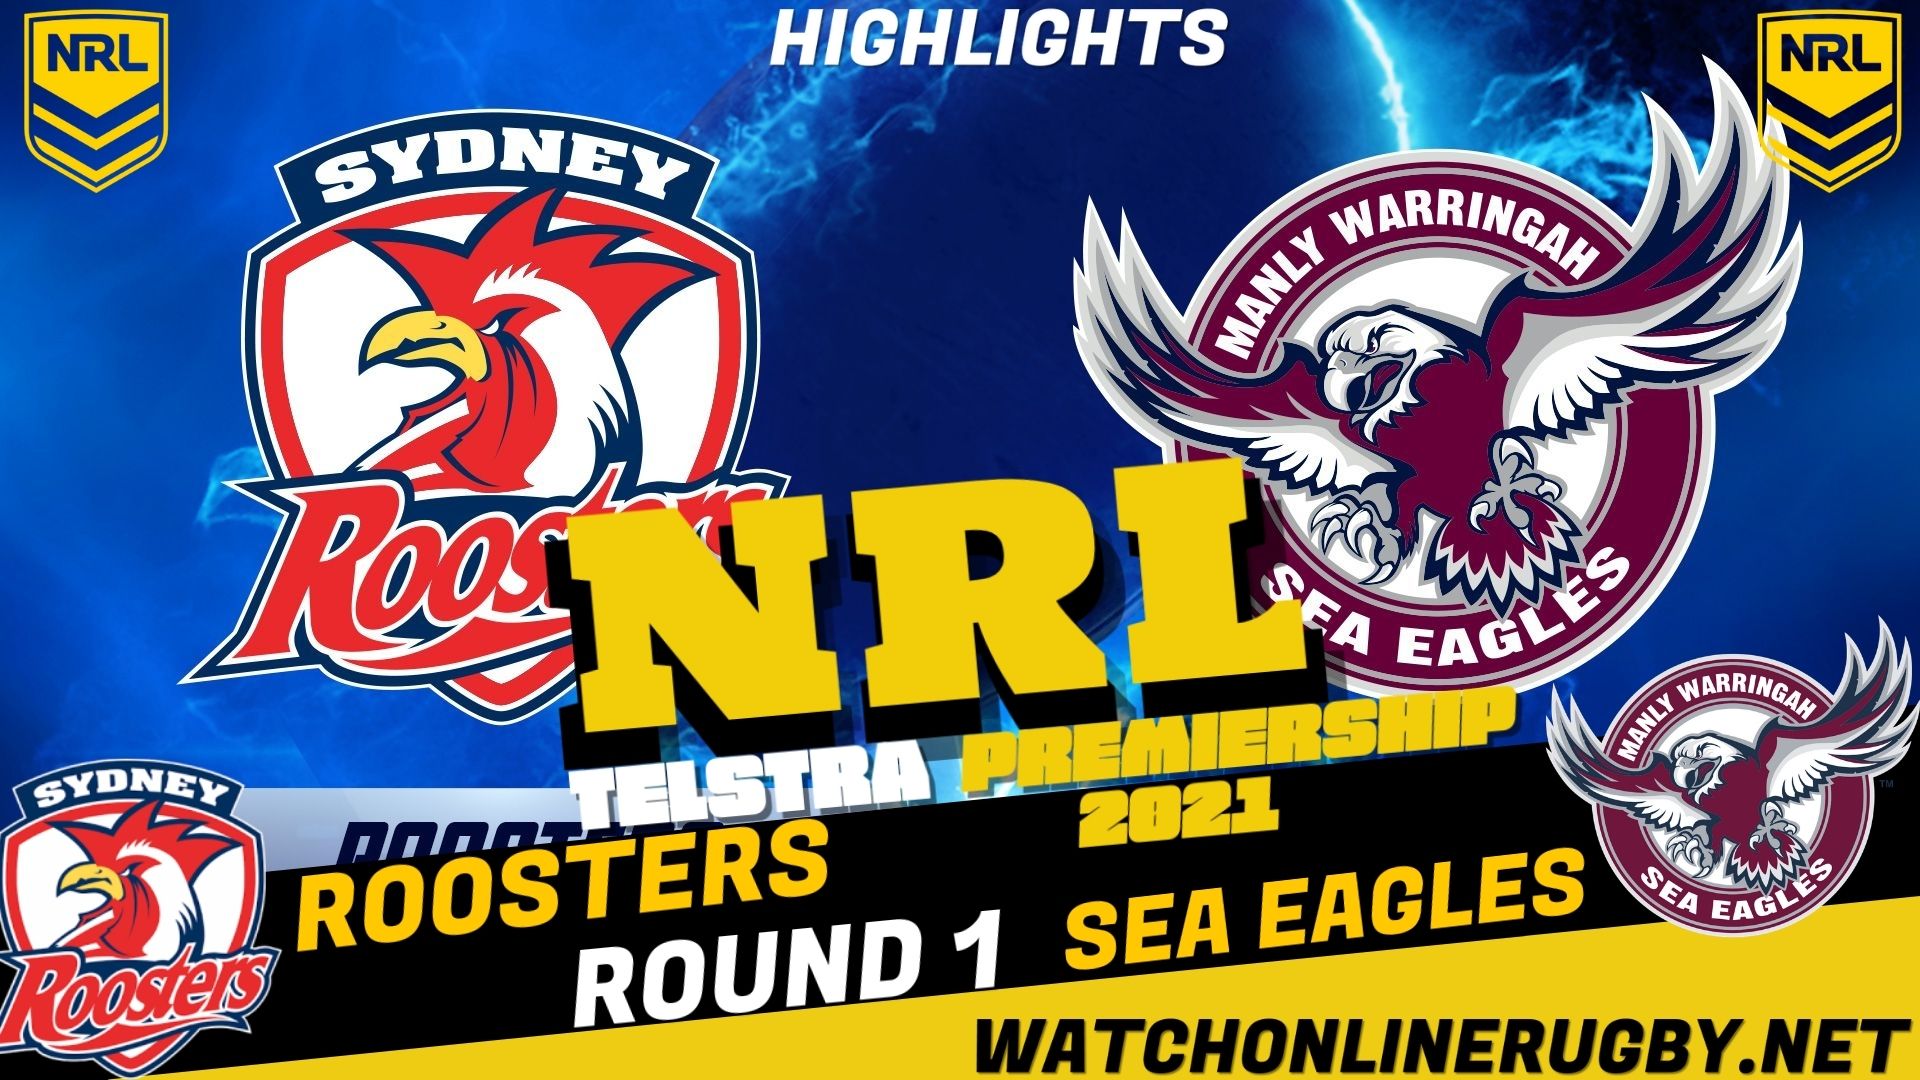 Roosters Vs Sea Eagles Highlights RD 1 NRL Rugby